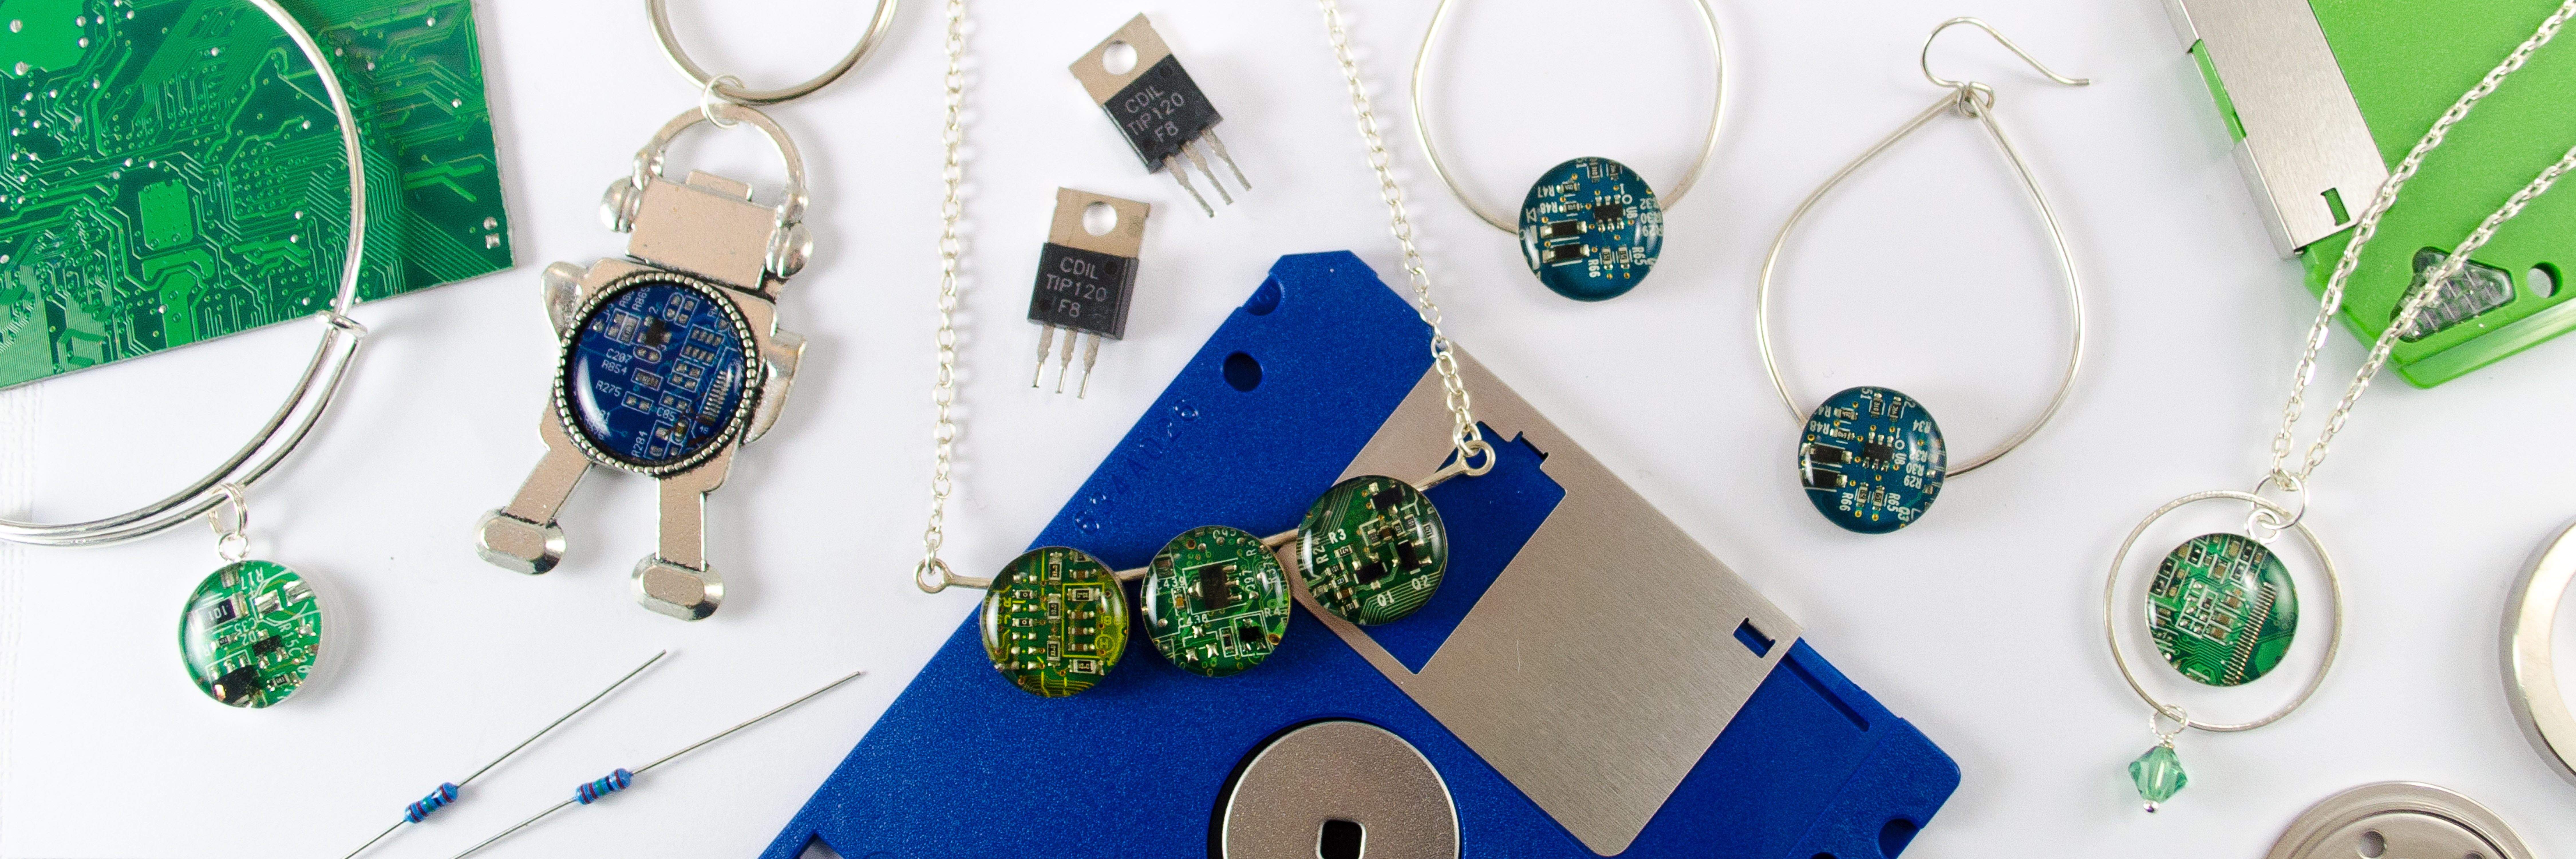 Electronic Waste Transformed into Wearable Art